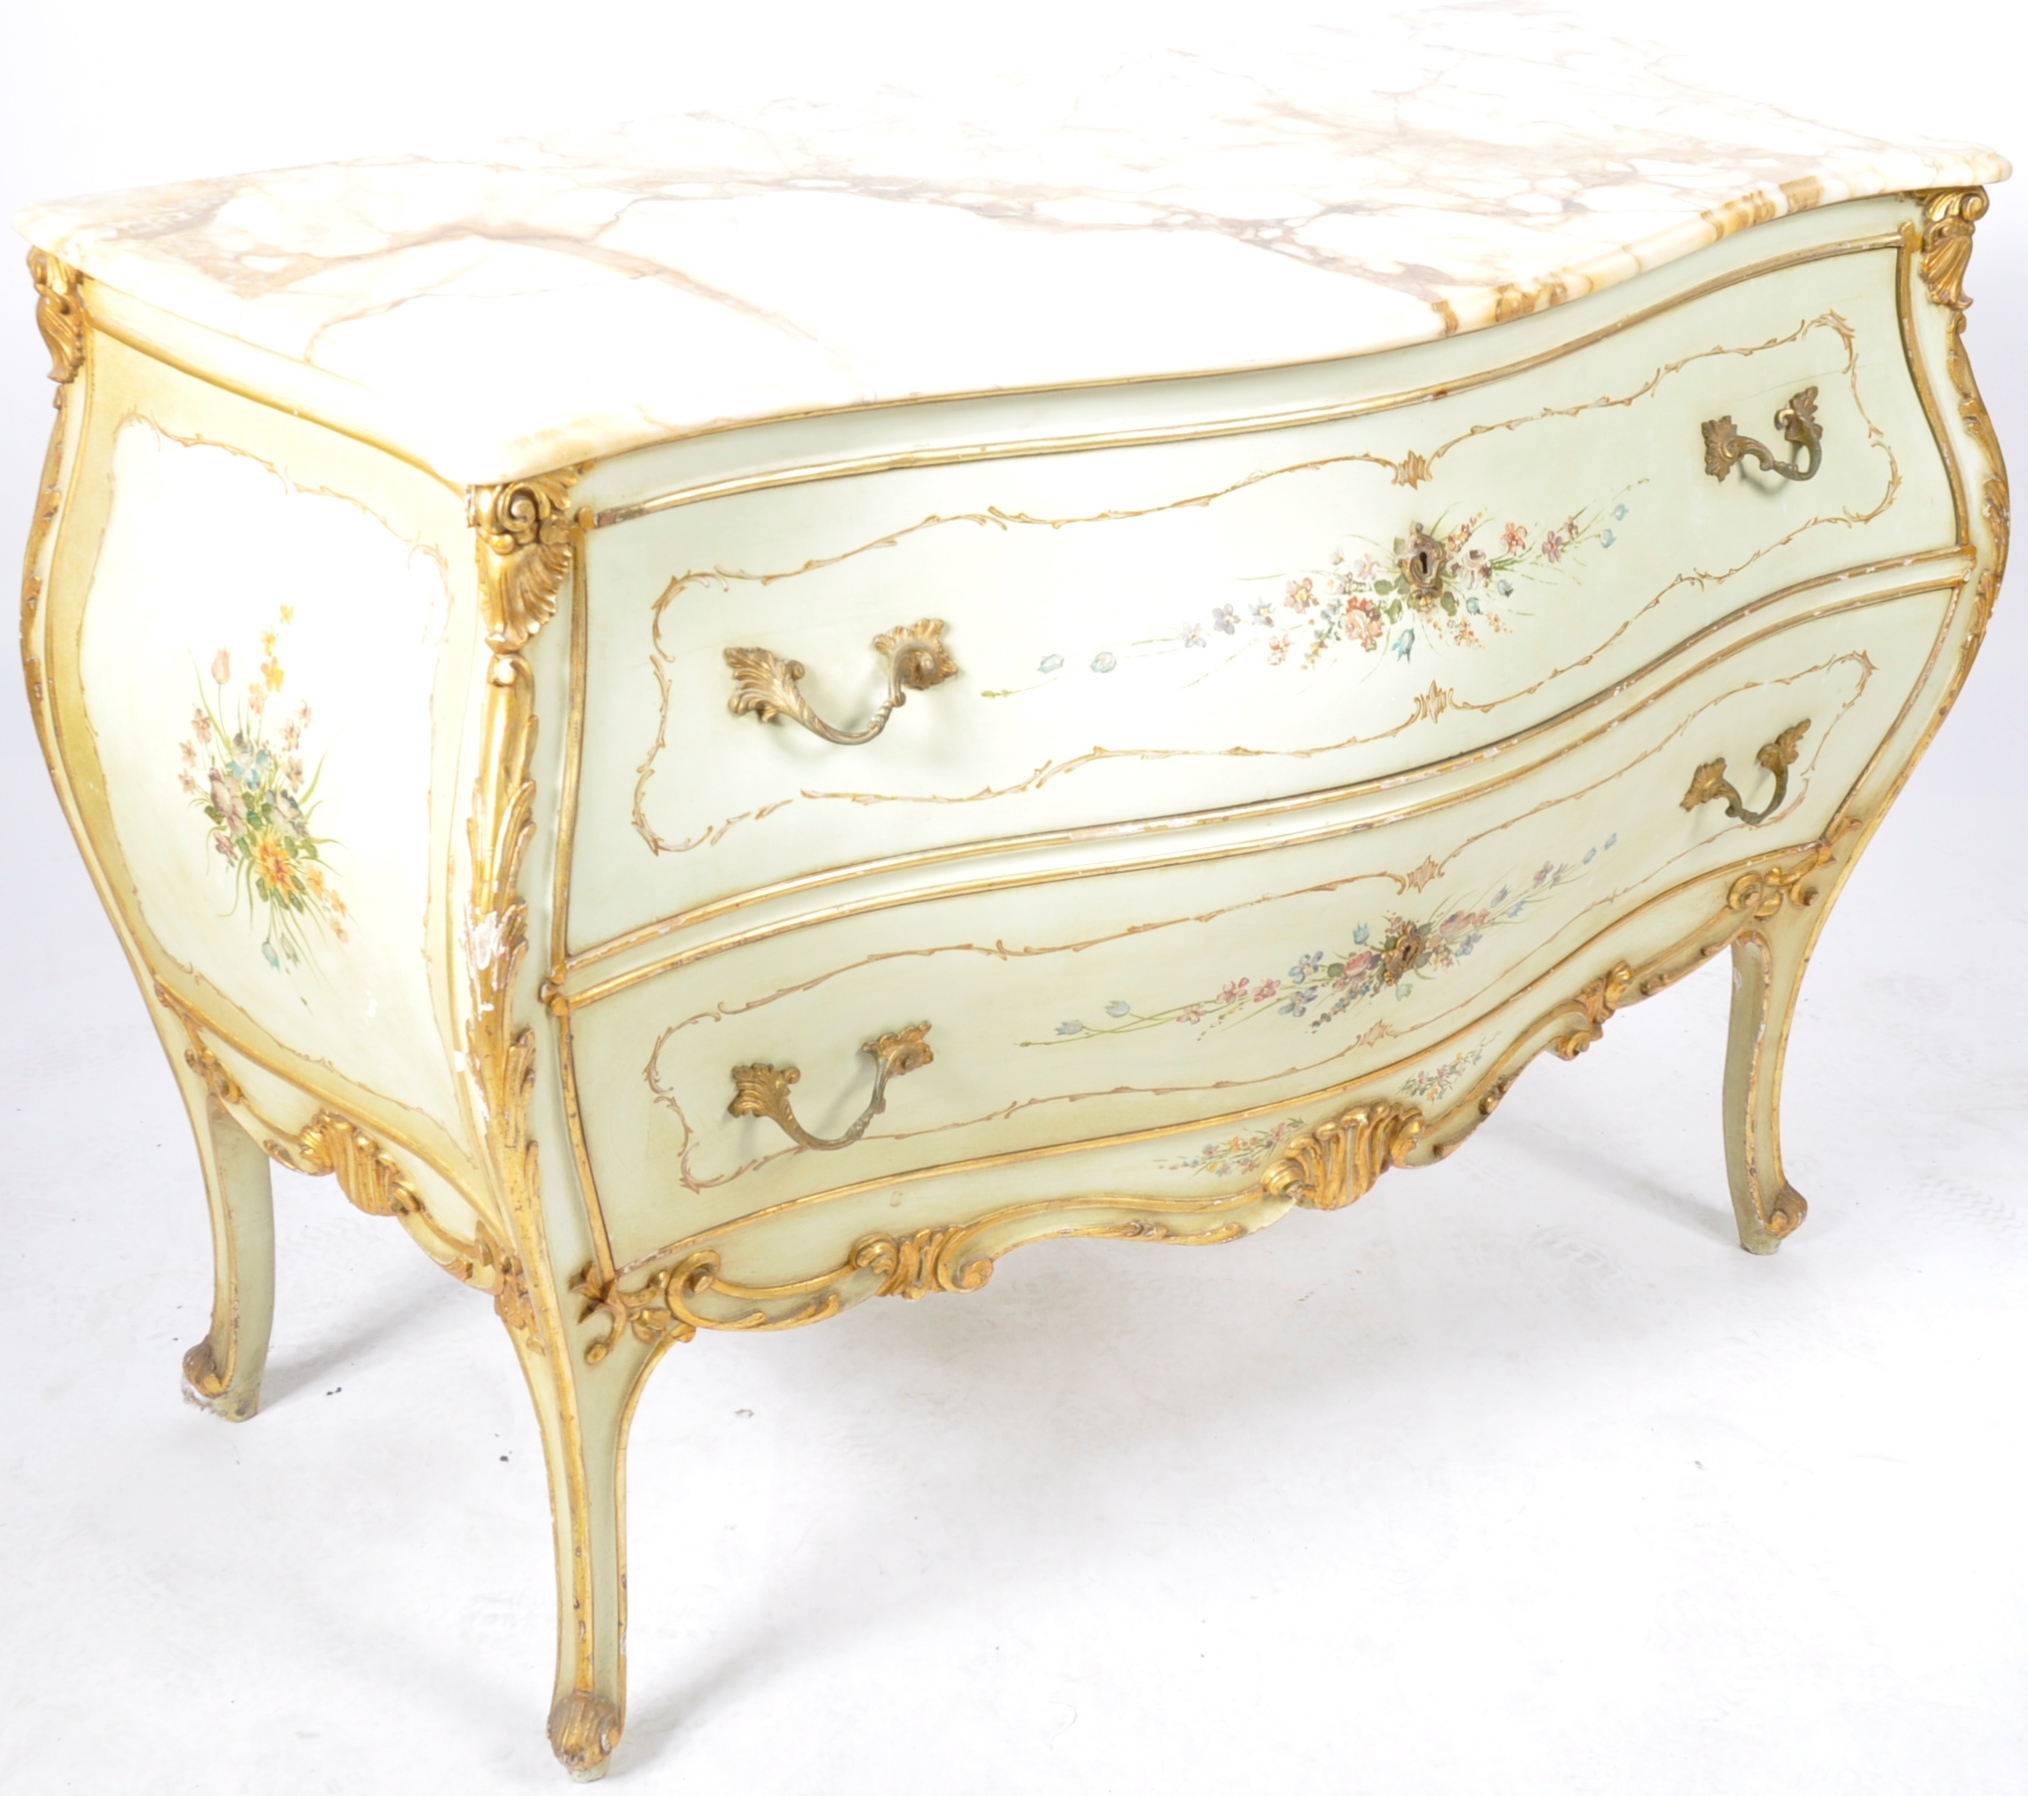 LARGE ANTIQUE VENETIAN ITALIAN MARBLE TOP COMMODE CHEST - Image 2 of 9